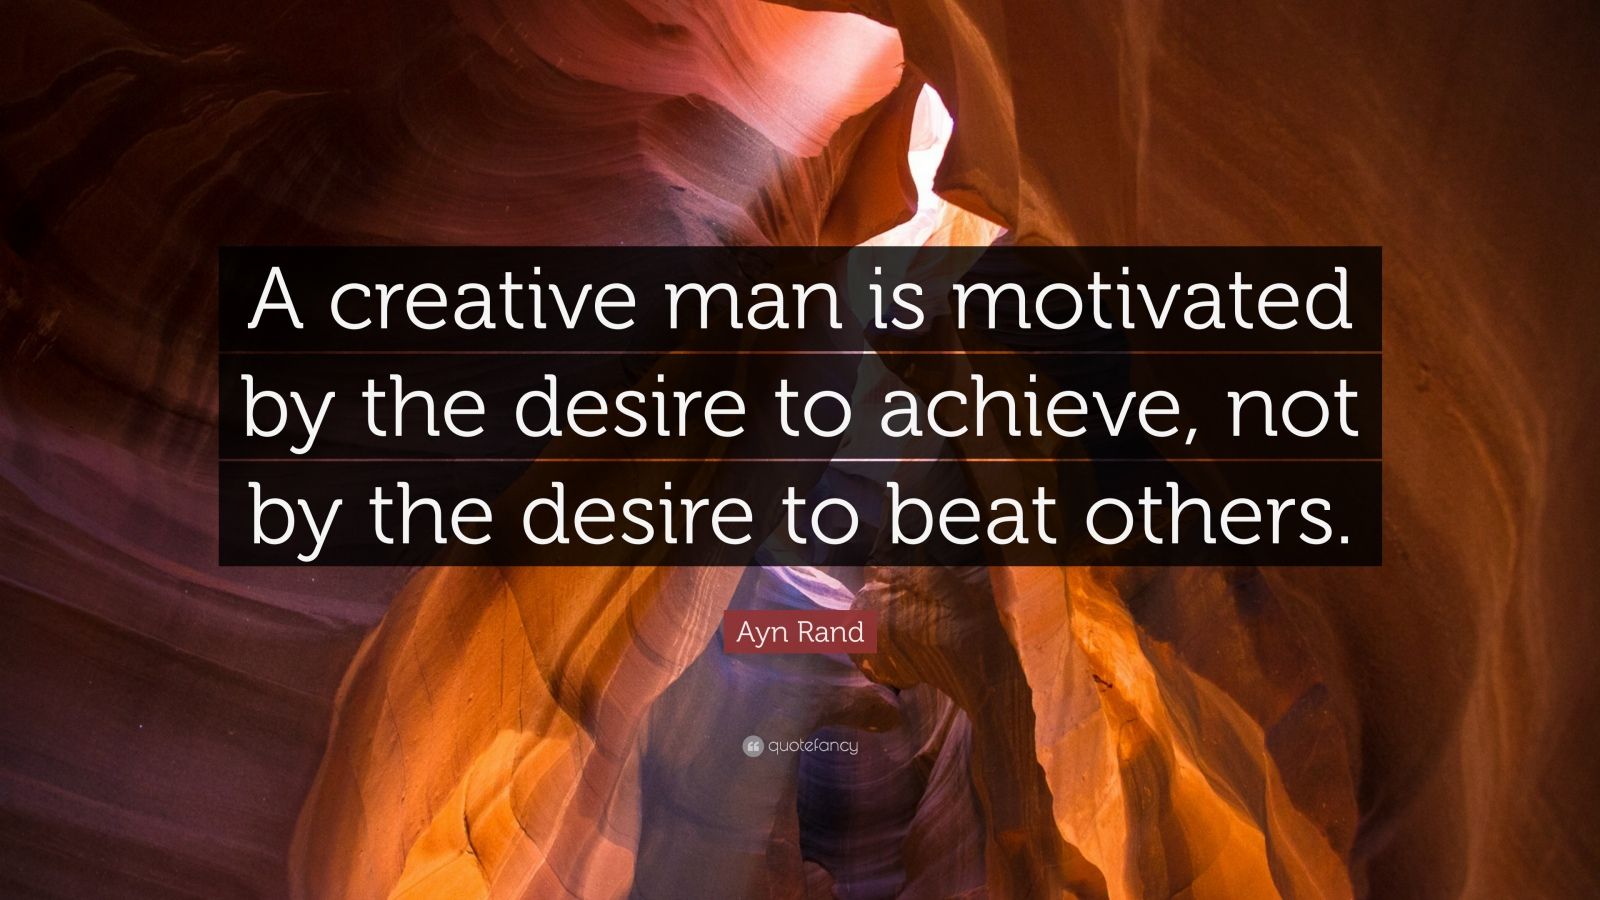 Ayn Rand Quote: “A creative man is motivated by the desire to achieve